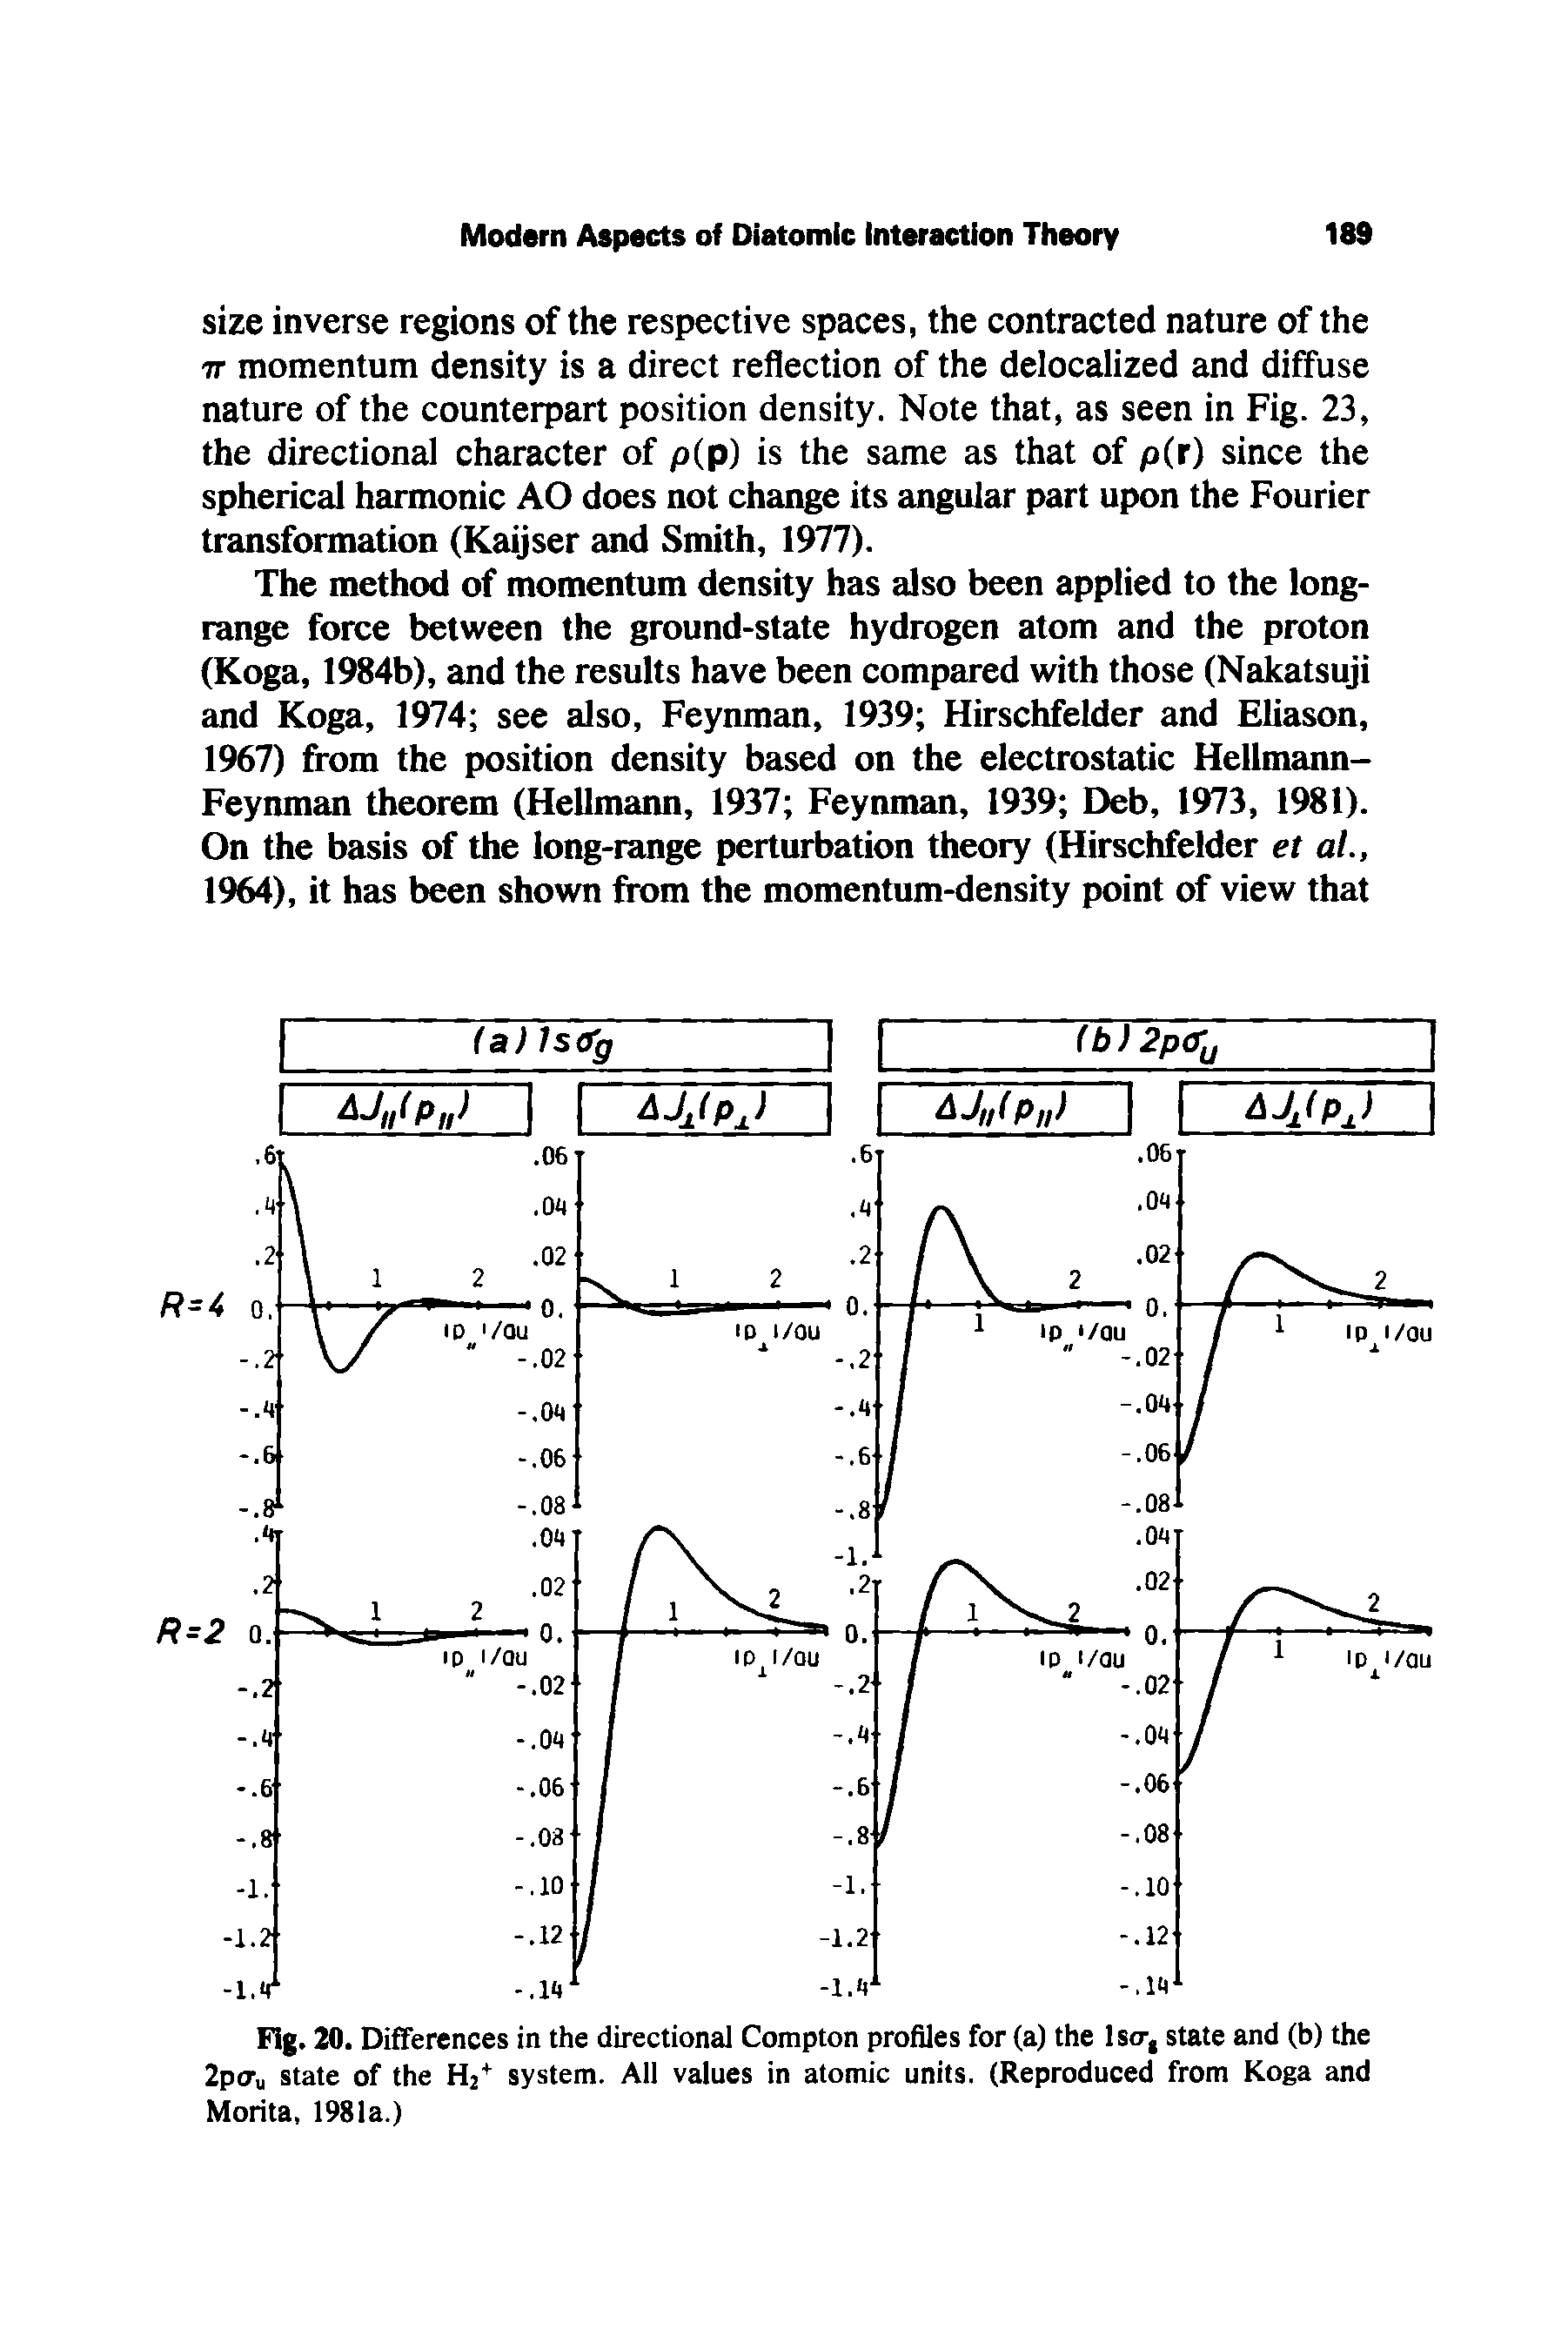 Fig. 20. Differences in the directional Compton profiles for (a) the lscr, state and (b) the 2po-u state of the H2+ system. All values in atomic units. (Reproduced from Koga and Morita, 1981a.)...